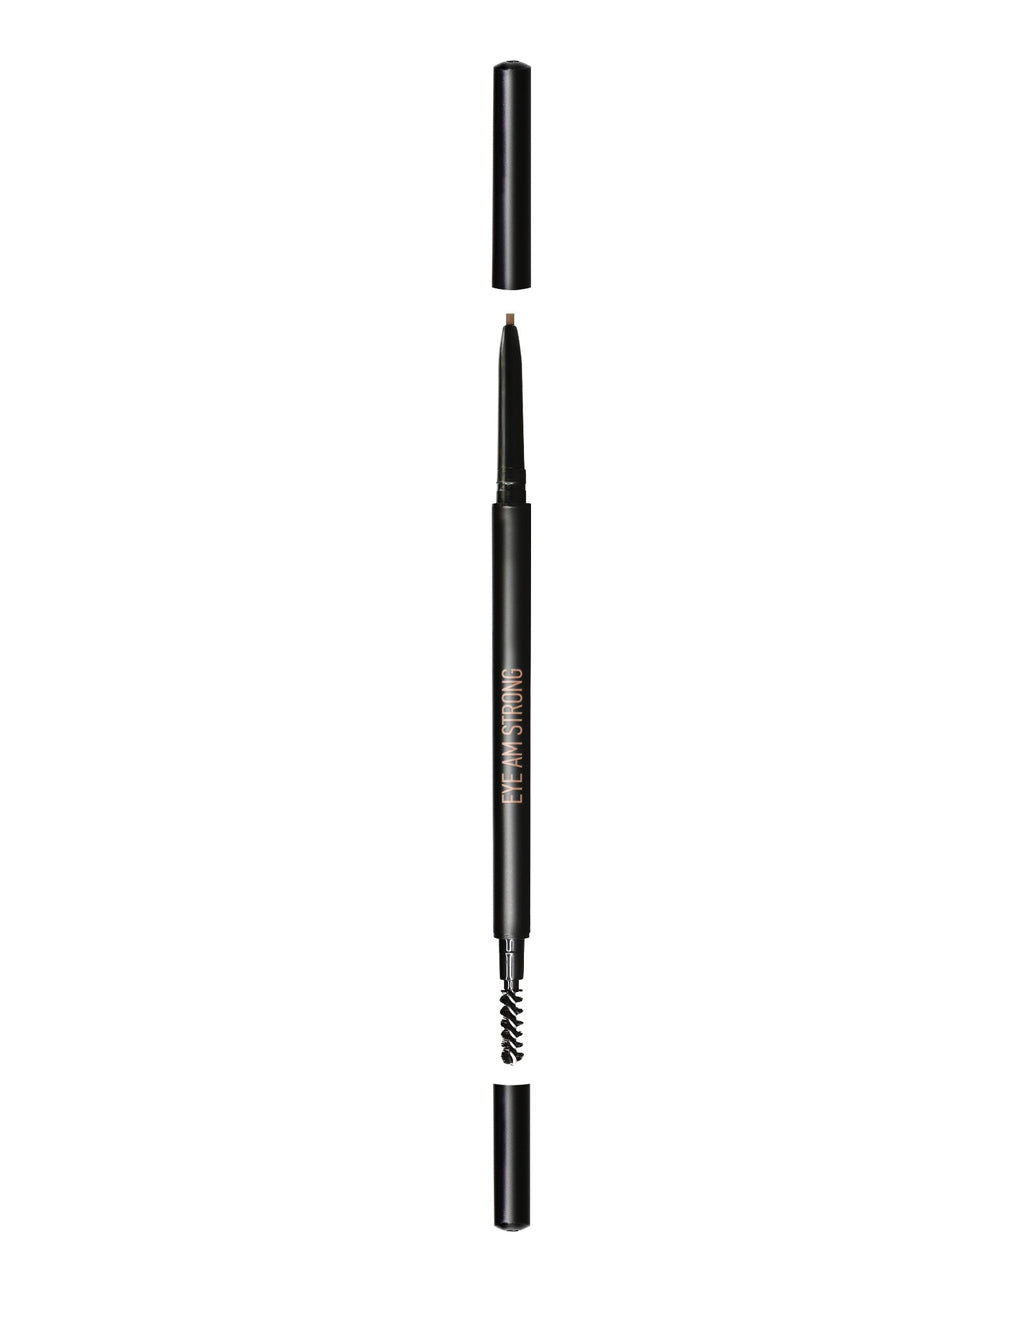 Definer Brow Pencil | REALHER Makeup LORDE AND BELLE